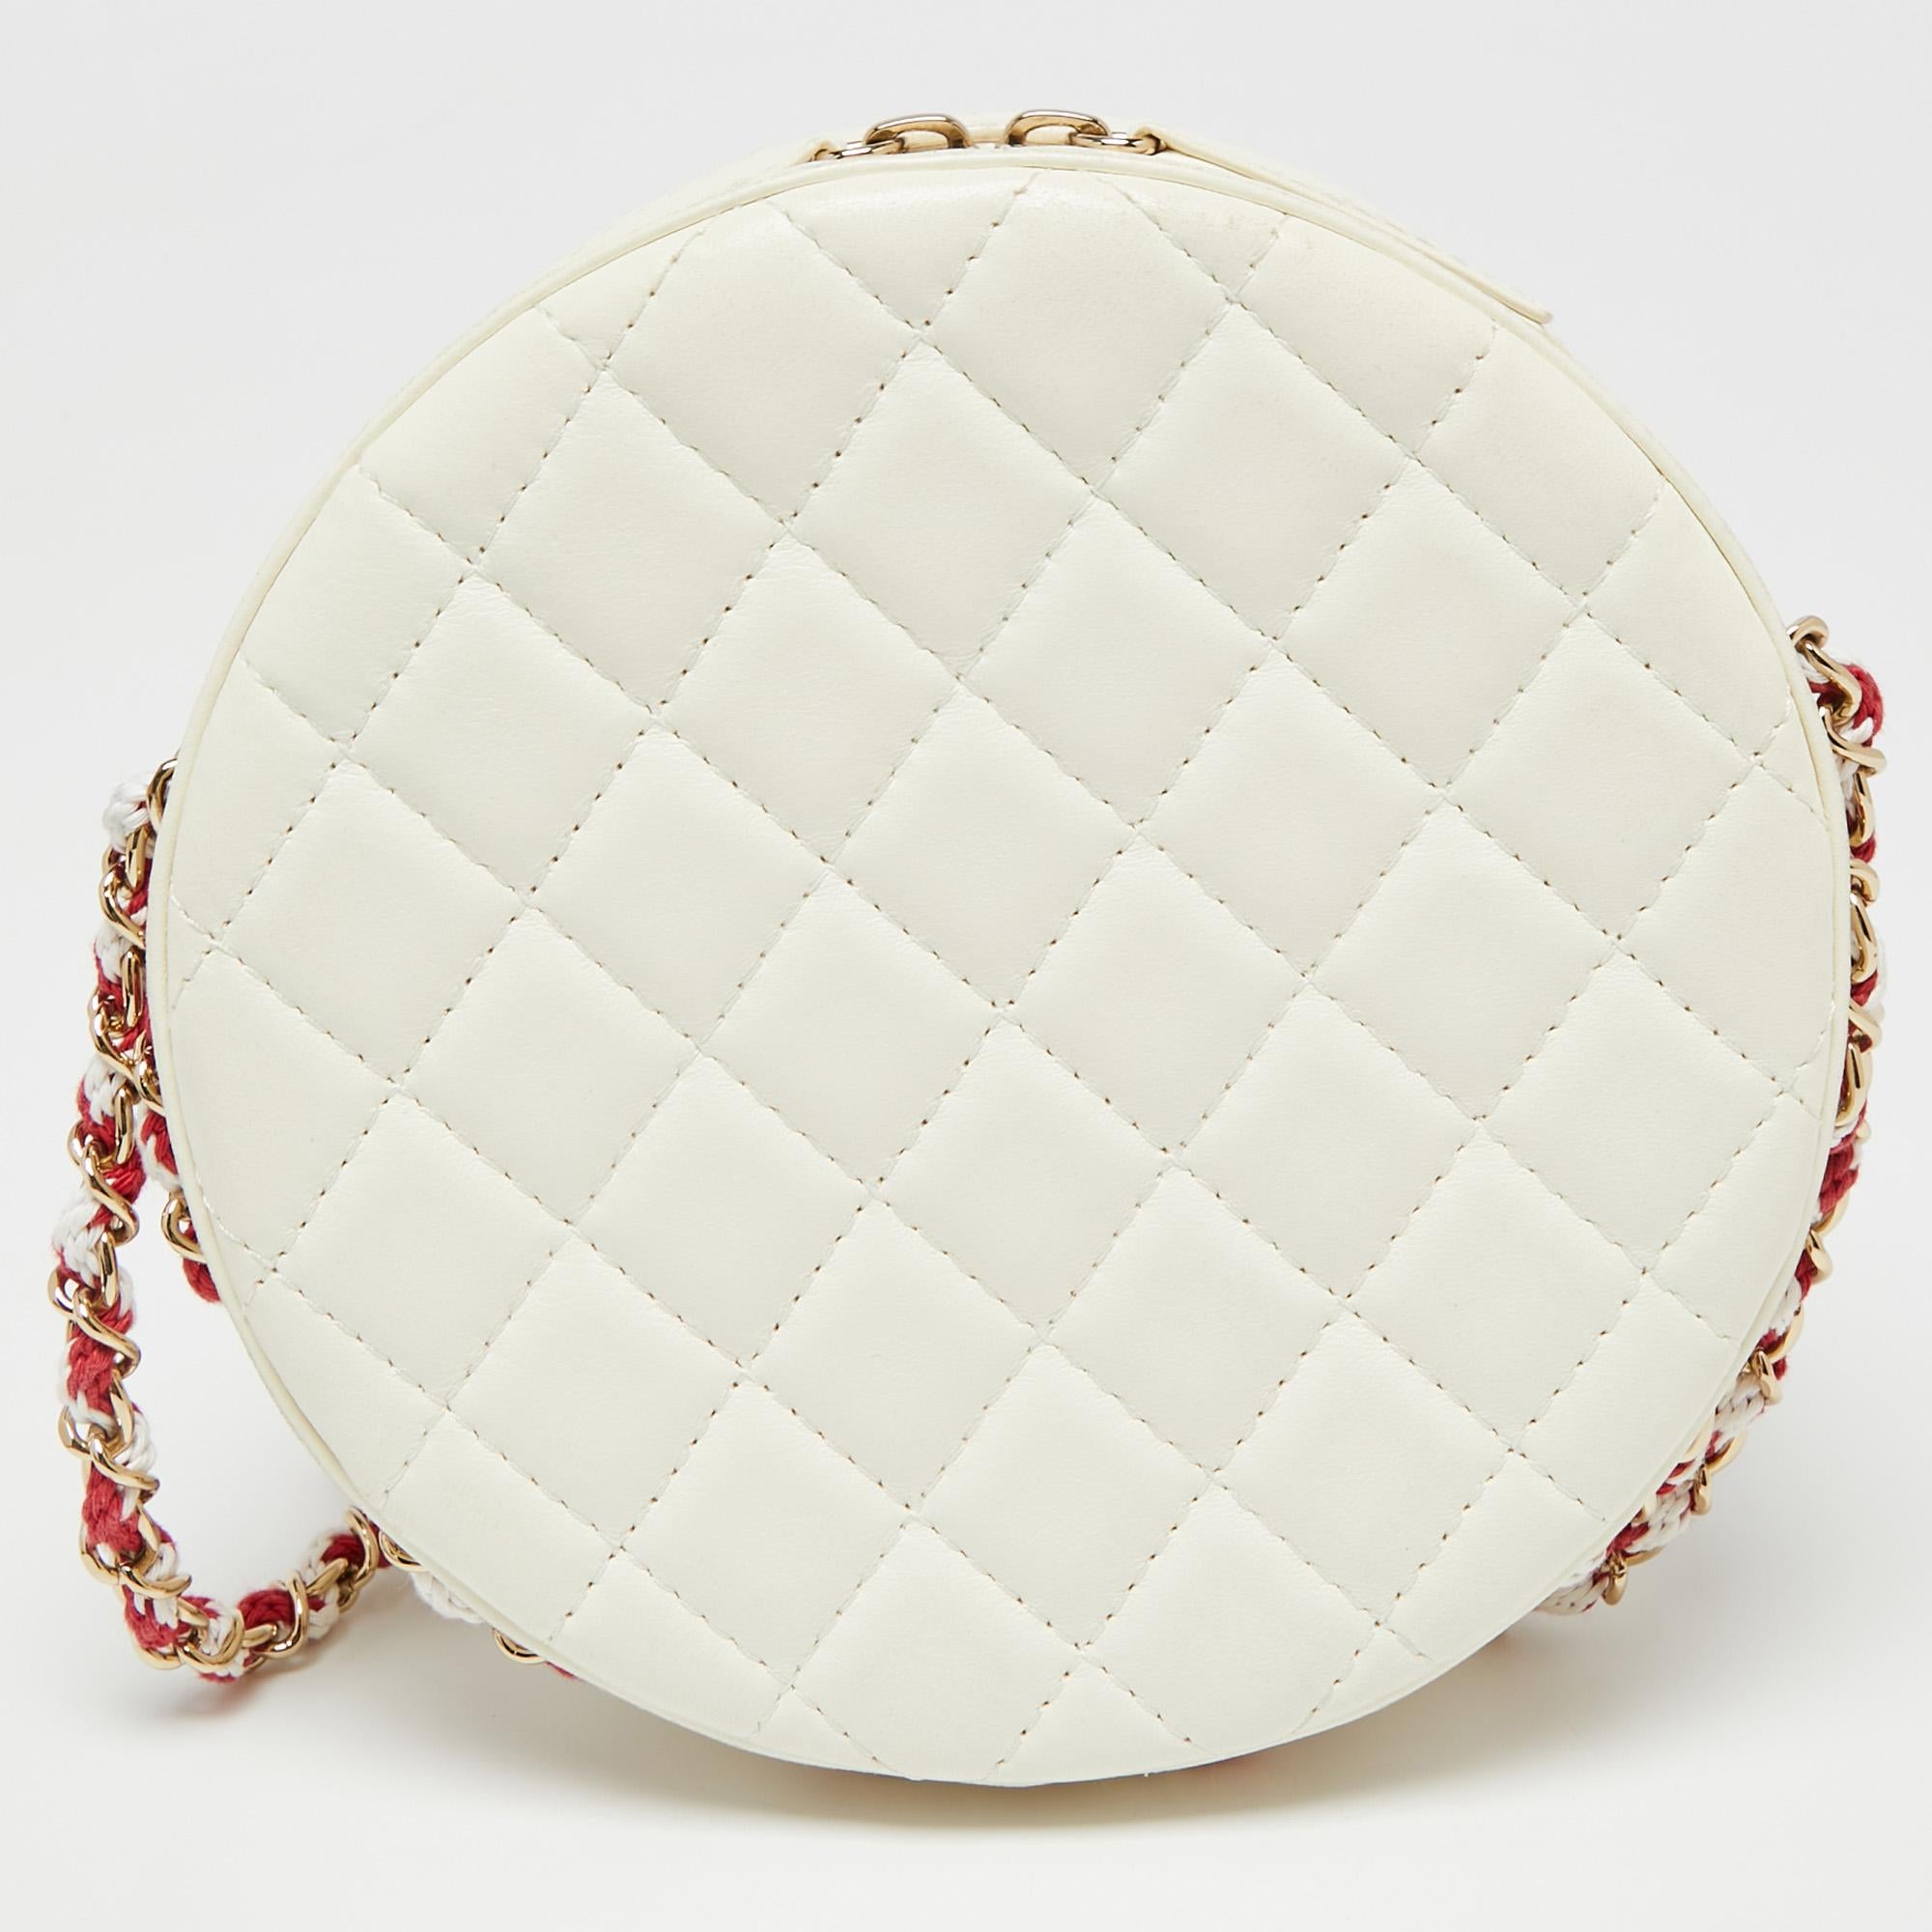 The Chanel Coco Lifesaver bag was introduced as a part of the Cruise 2019 collection. This bag comes with a new sense of modernity but retains the tradition of the brand. Created from leather, it is designed into a unique silhouette of a lifesaver